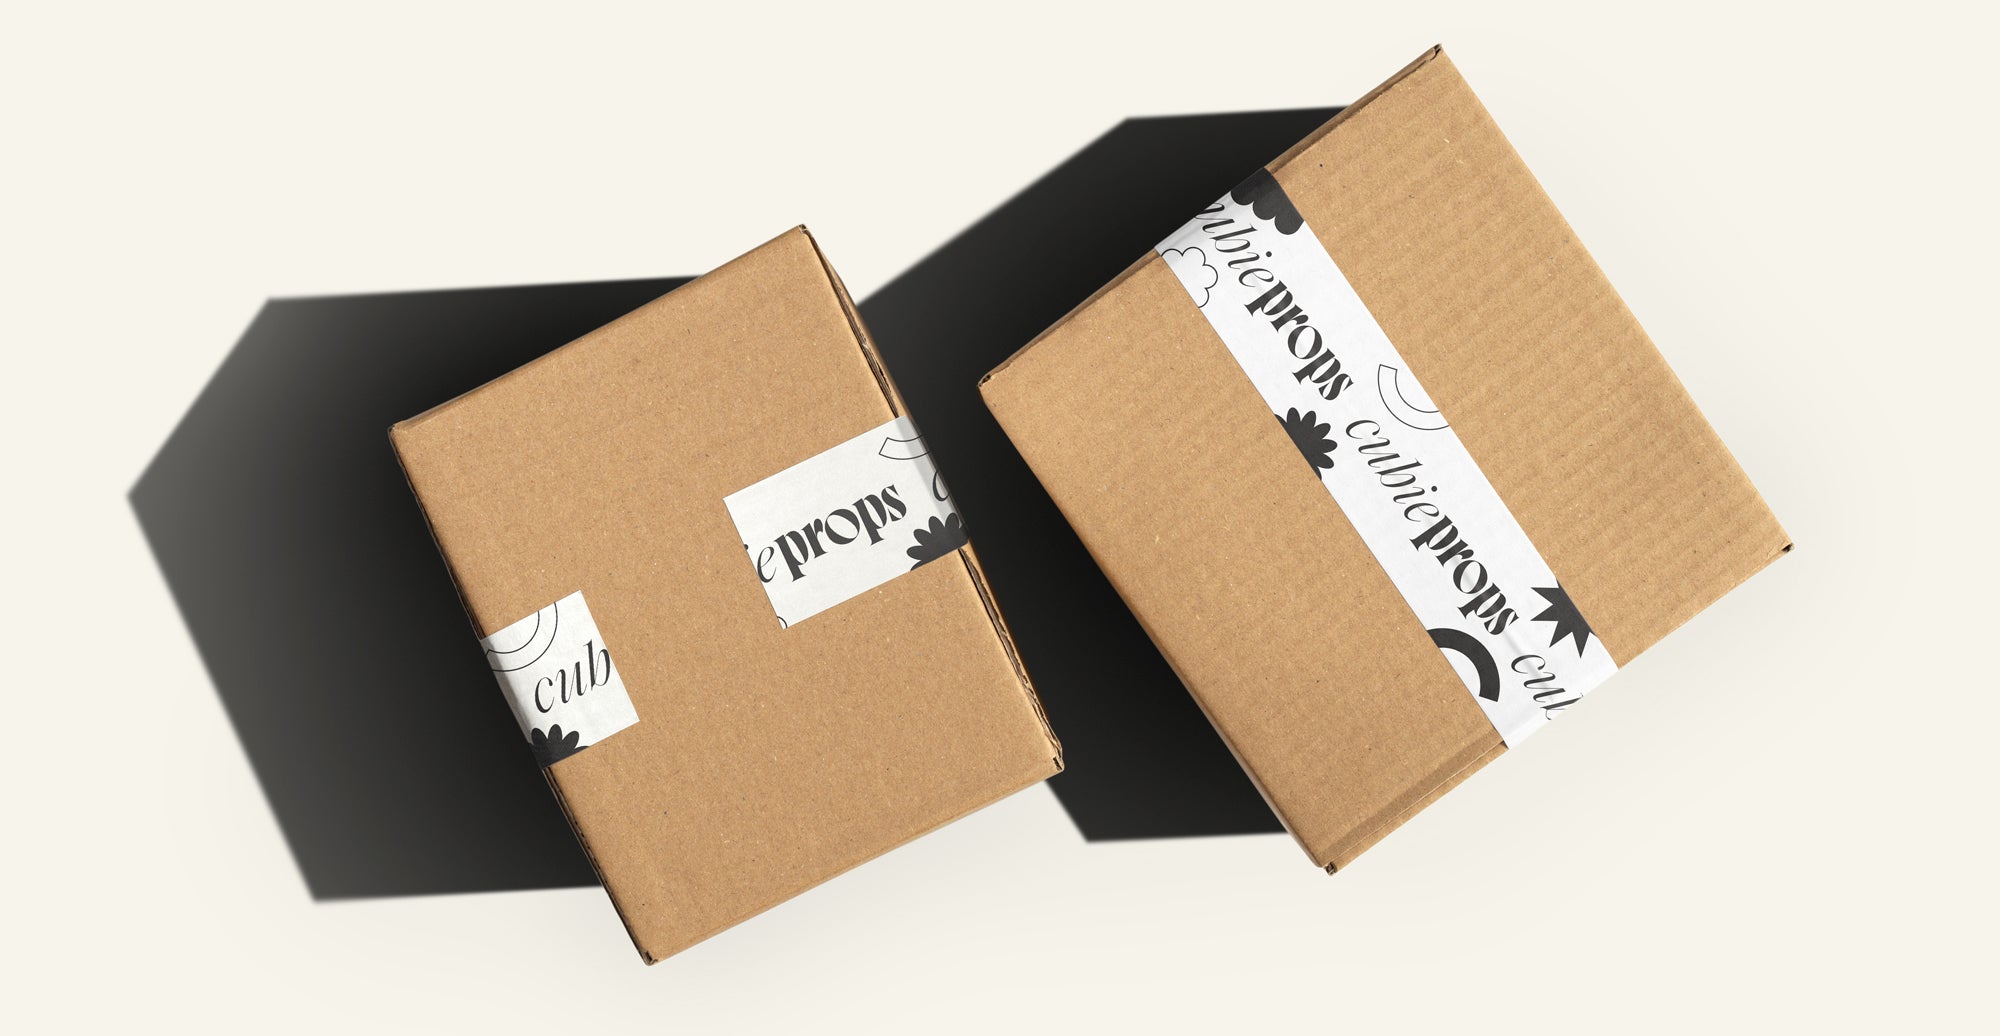 Cubie Props brown packaging boxes with white and black packaging tape